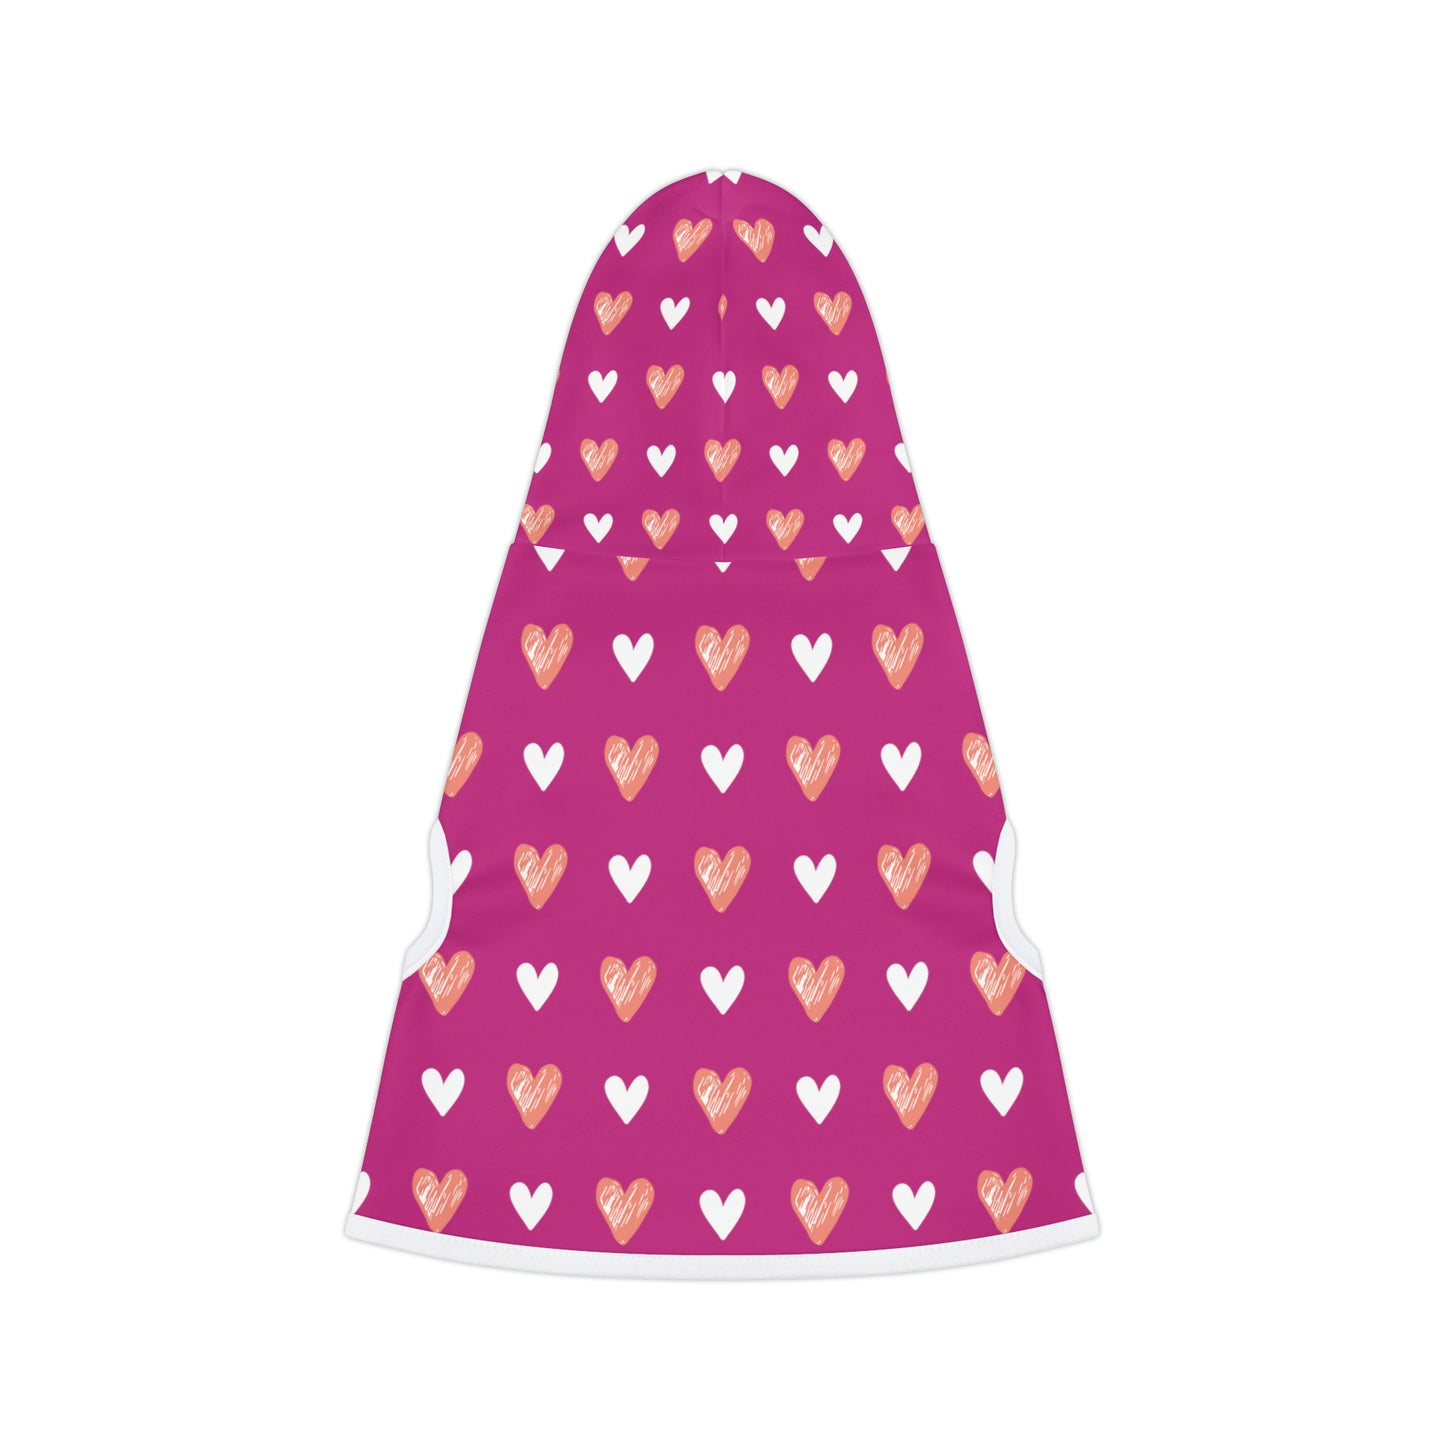 a pet hoodie with a beautiful hearts pattern design. Hoodie's Color is pink